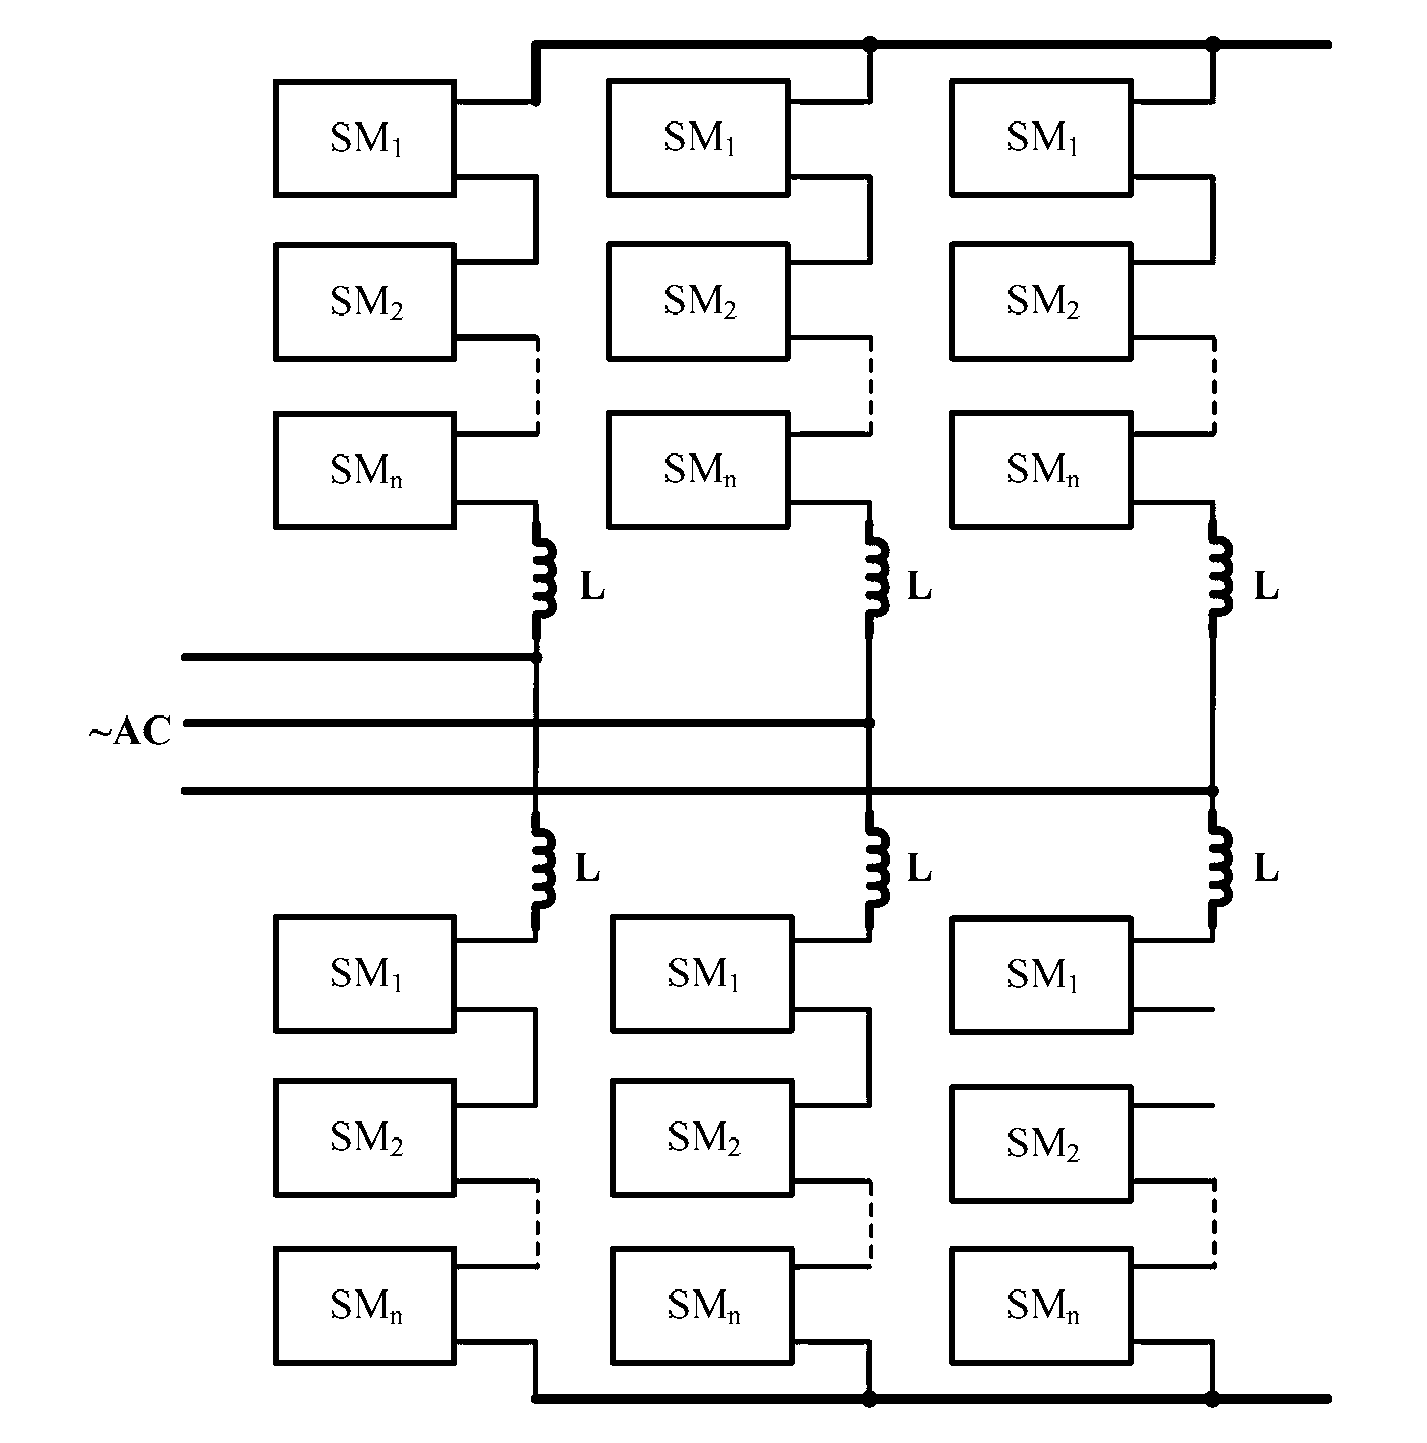 Tri-phase modular multi-level converter and fault-tolerate detecting method for IGBT (insulated gate bipolar translator) open circuit fault in sub-modules thereof